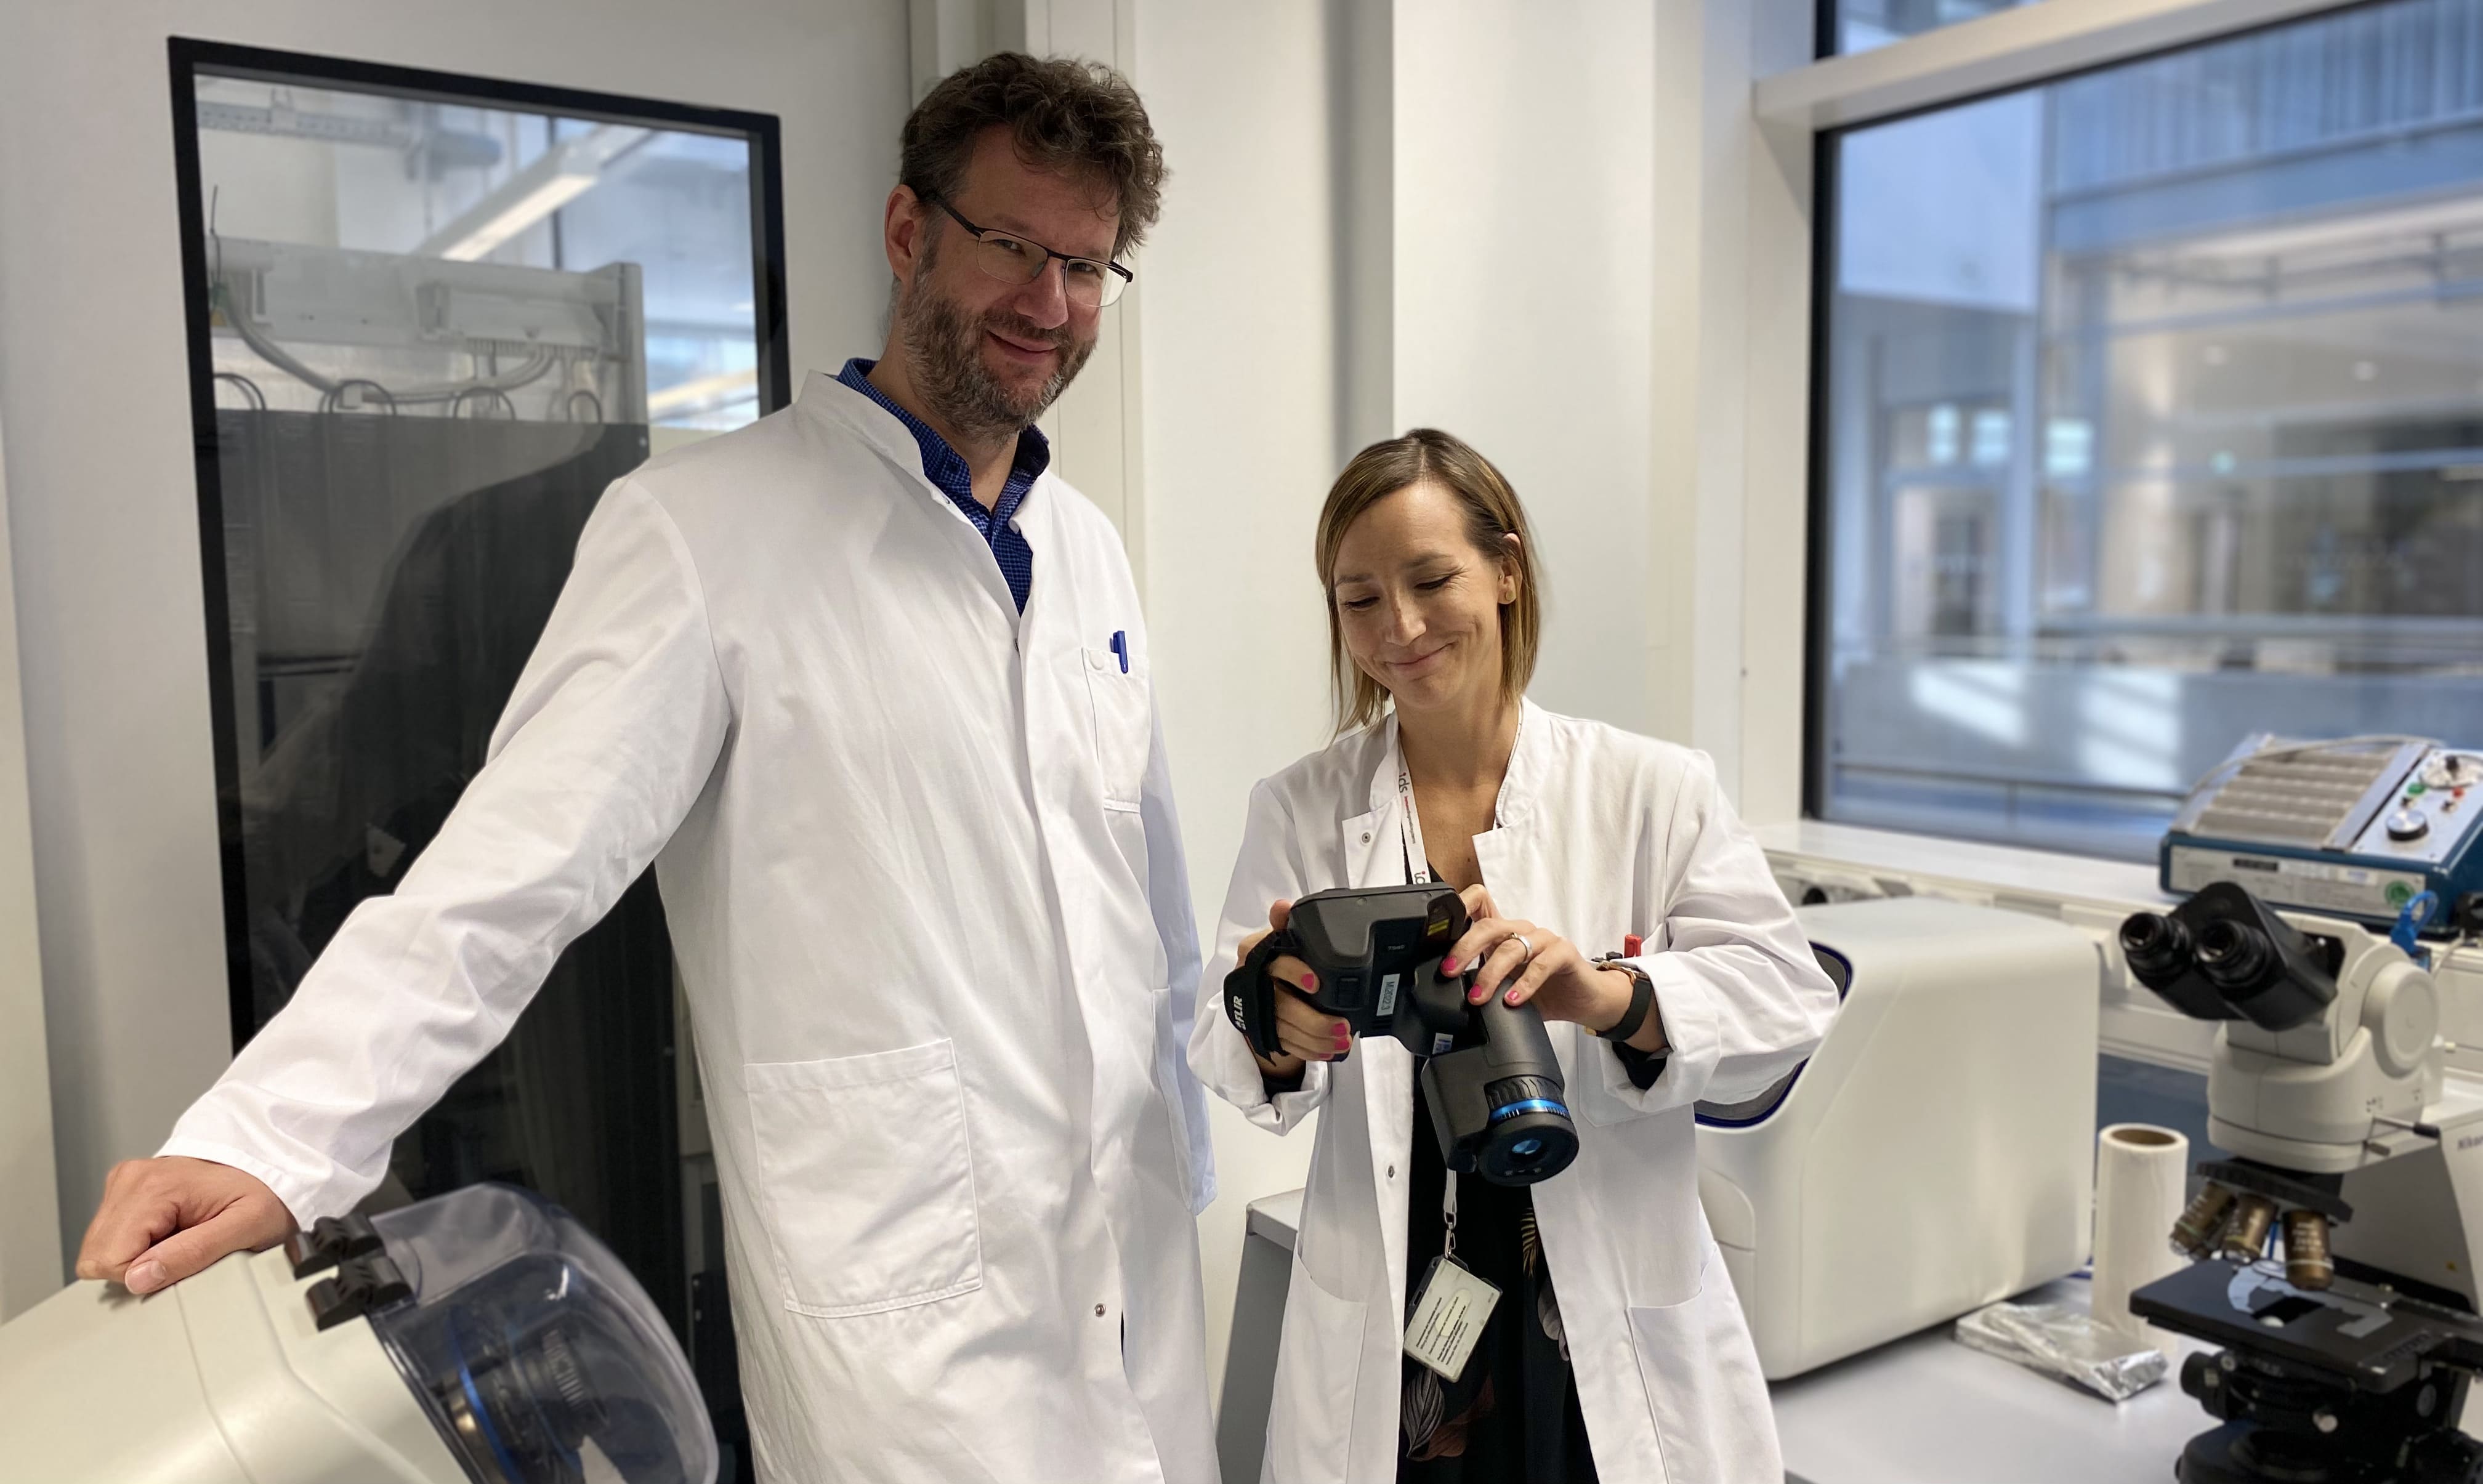 Jens Mittag, Head of the Institute of Endocrinology and Diabetes at the University of Lübeck (left) with Dr. Rebecca Ölkrug, Junior Group Leader "Thyroid & BAT Programming" and first author of the study.